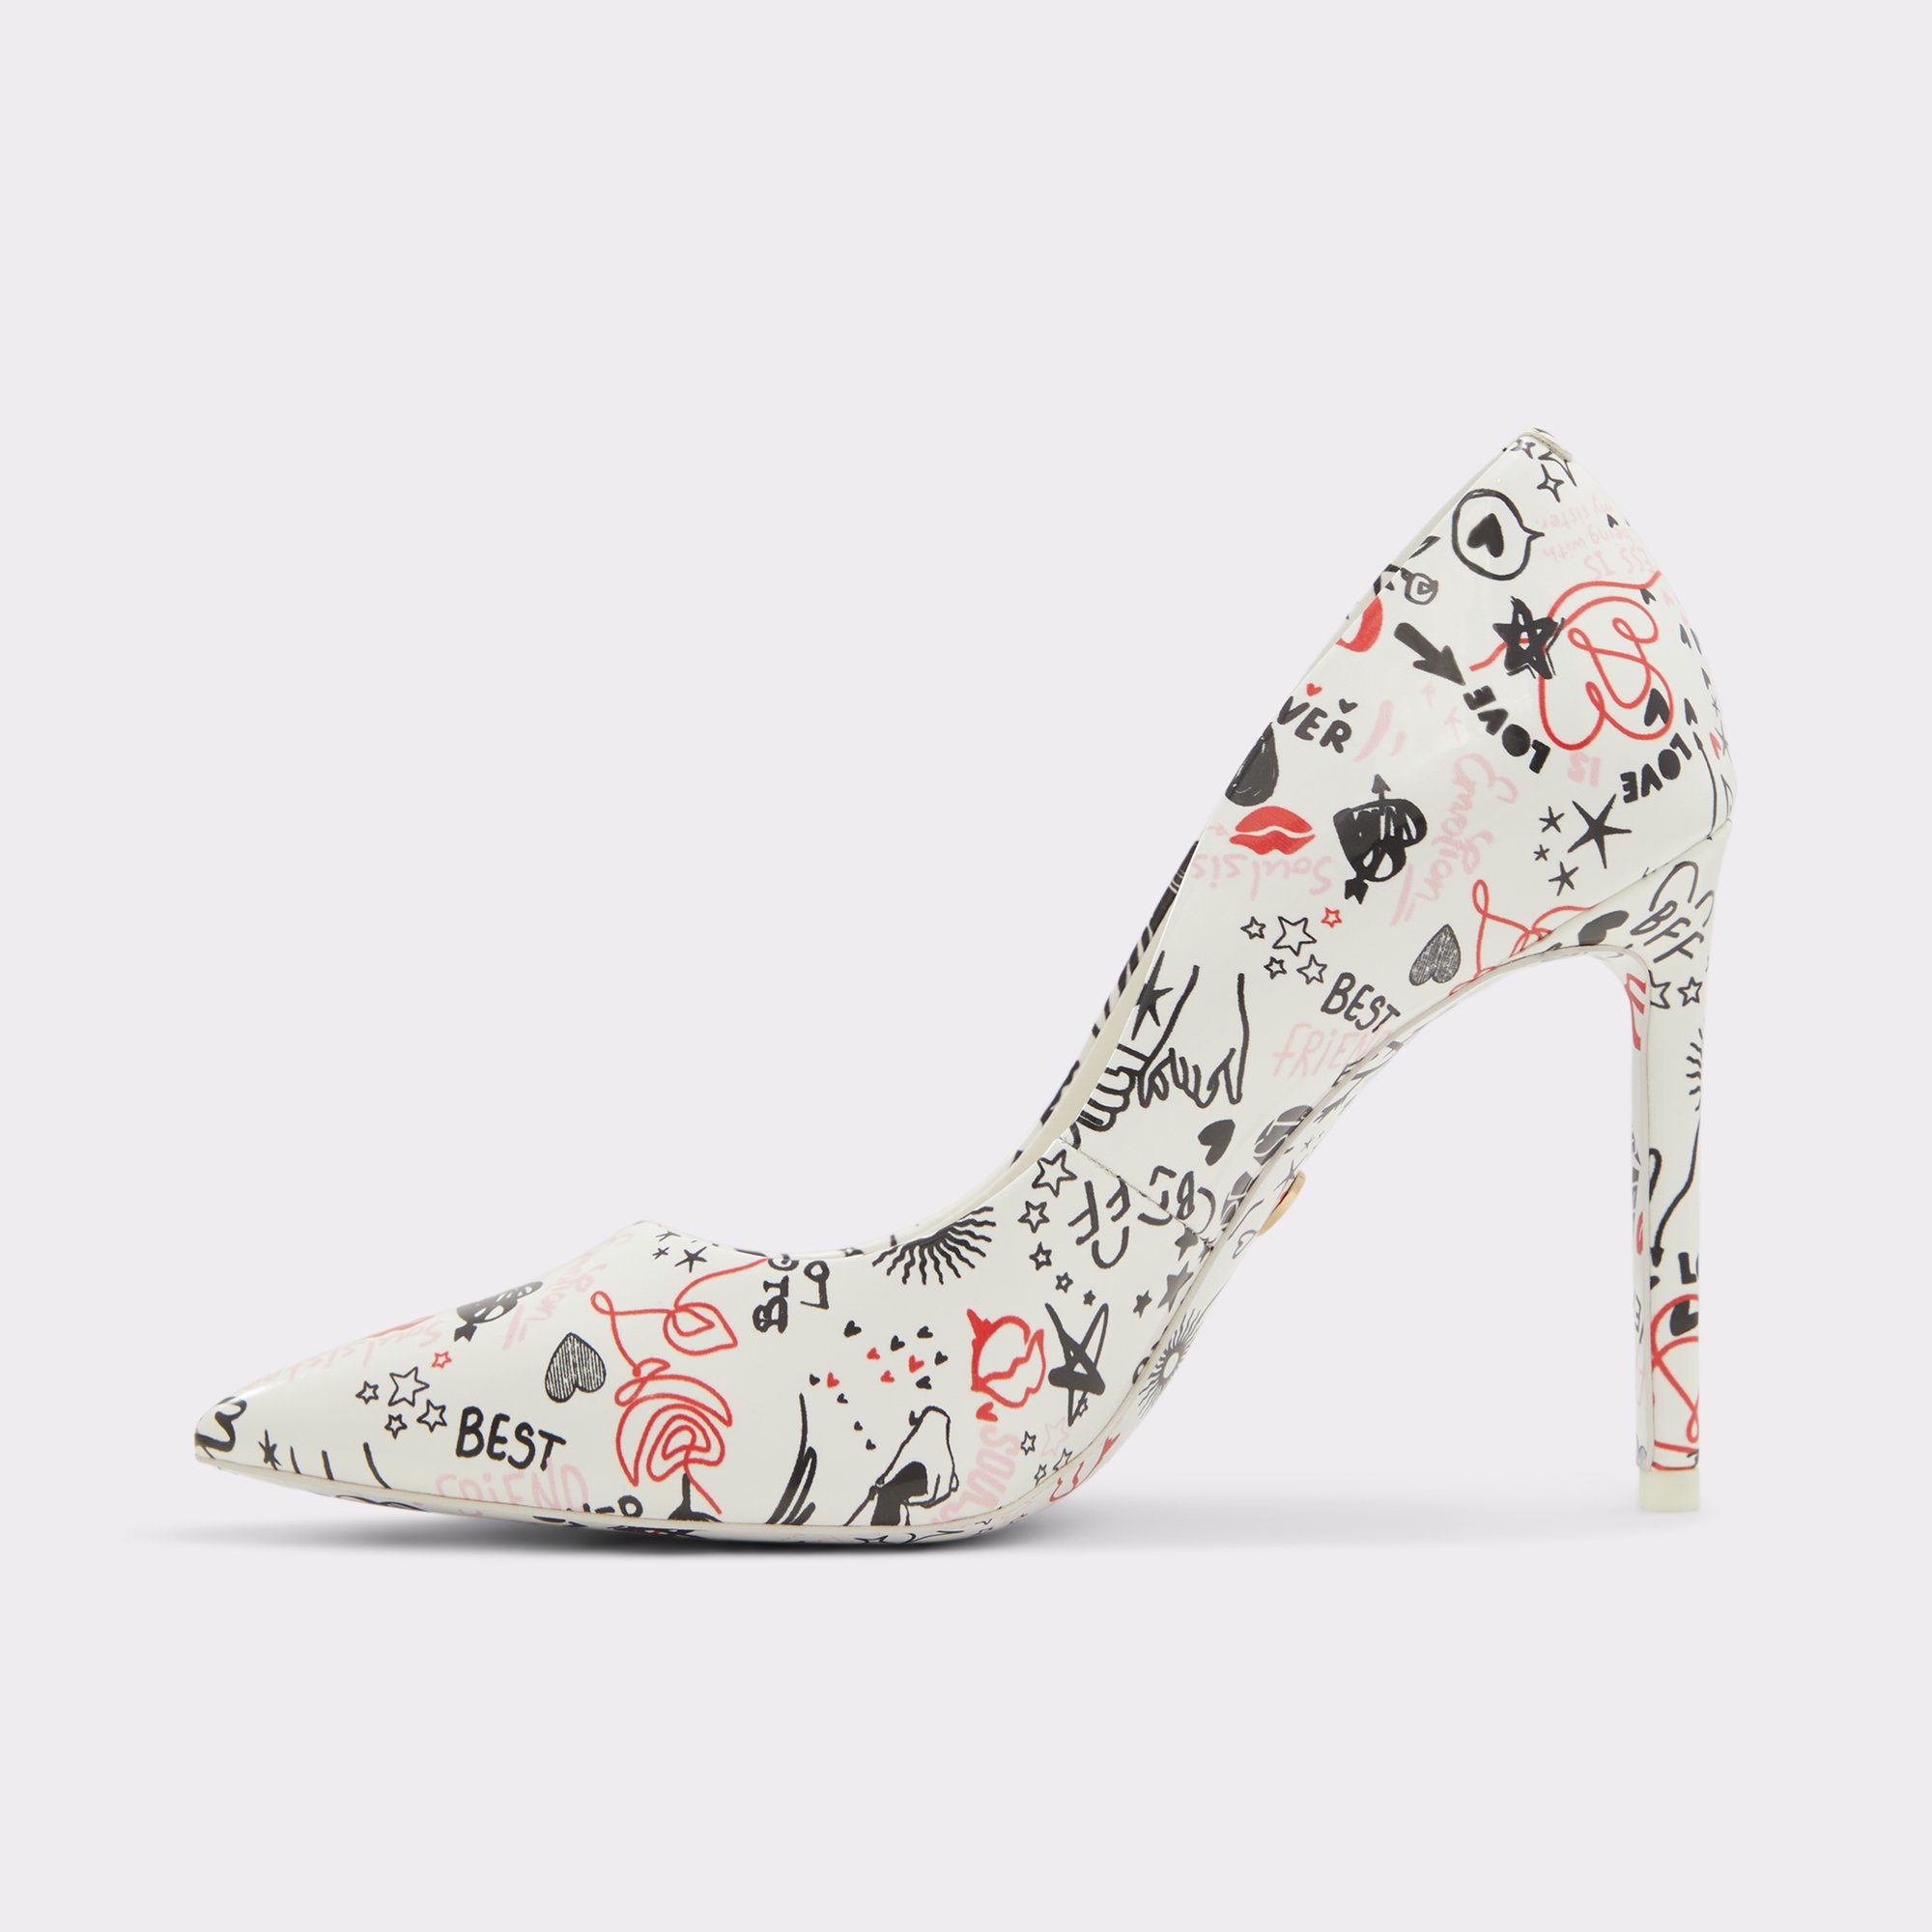 Stessy2.0 Assorted Synthetic Mixed Material Women's Pumps | ALDO Canada